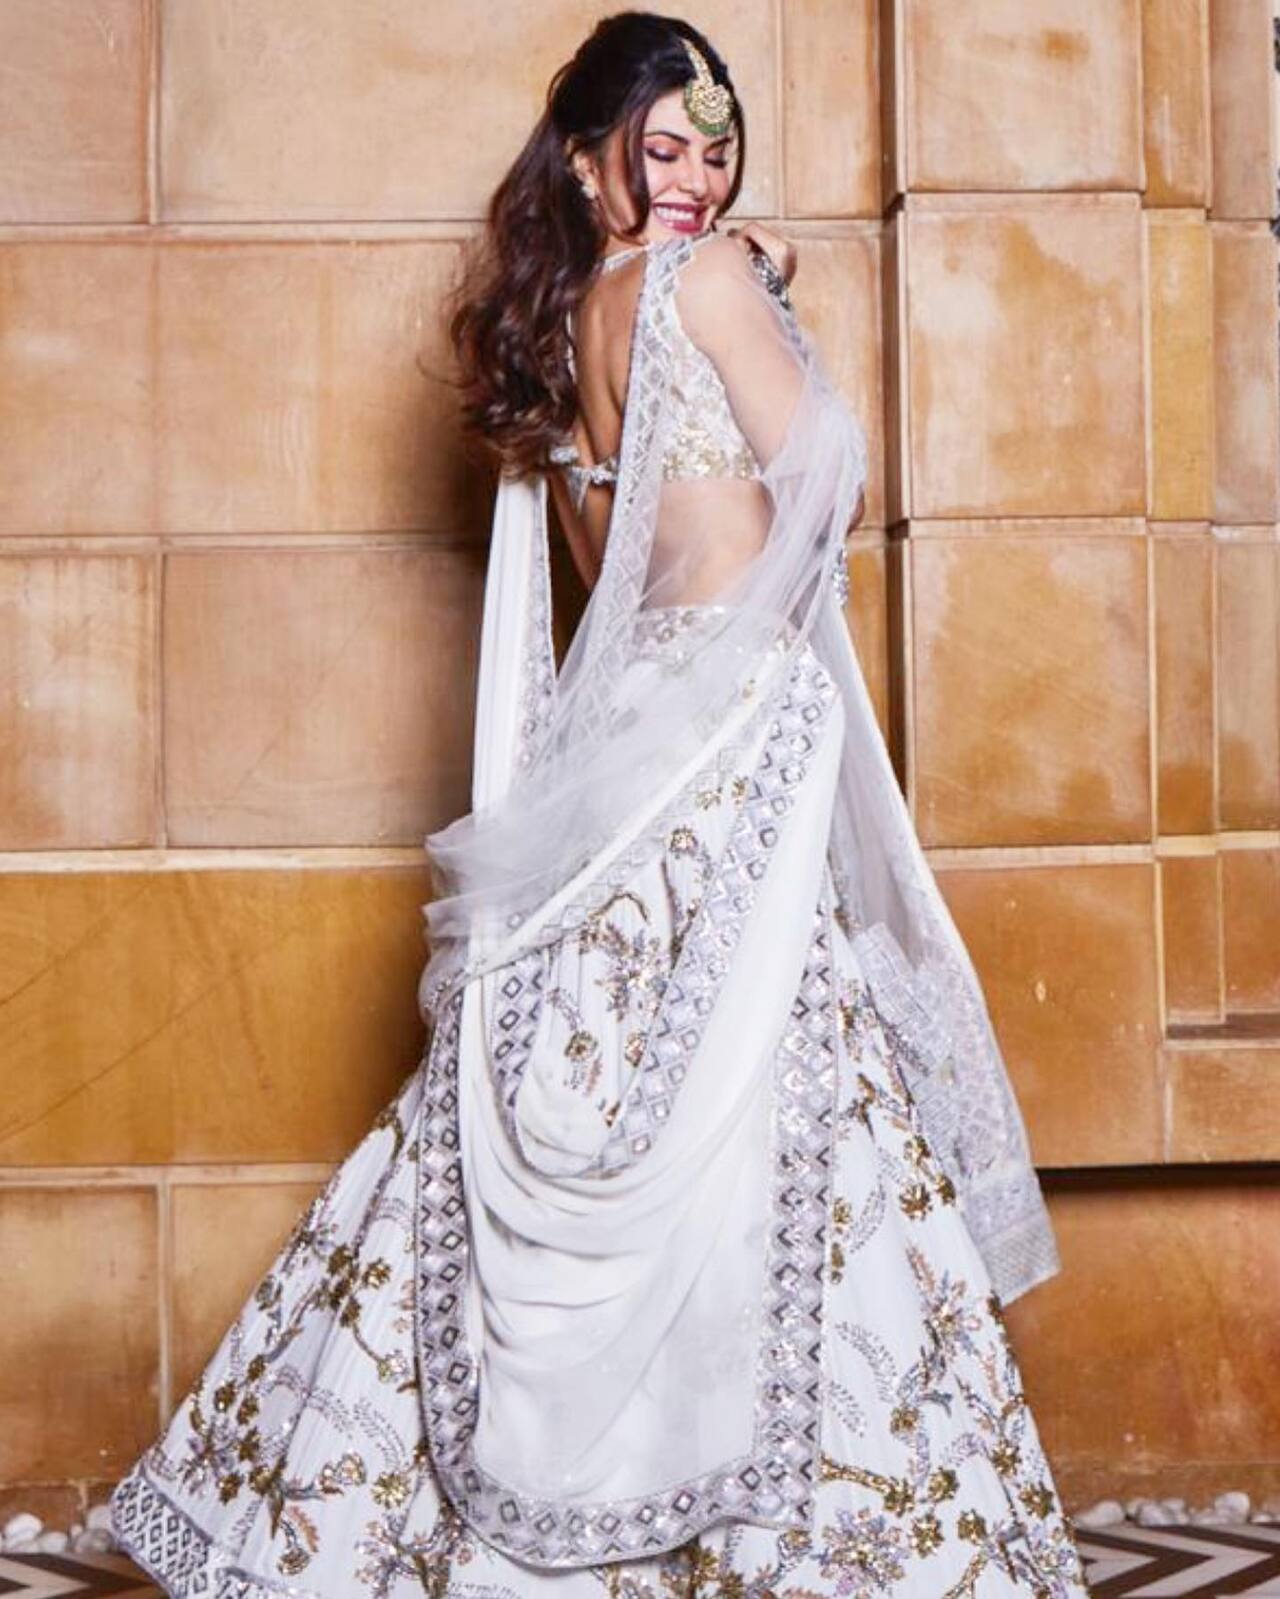 Jacqueline Fernandez
At Isha Ambani and Anand Piramal's Udaipur pre-wedding festivity, luminaries from Bollywood, global fame, fashion, and politics donned their designer finest. Among them, Jacqueline Fernandez was particularly striking in an ivory Manish Malhotra lehenga with subtle gold detailing. Styled by Chandi Wabhi, she complemented her attire with bangles, earrings, and a maang tikka